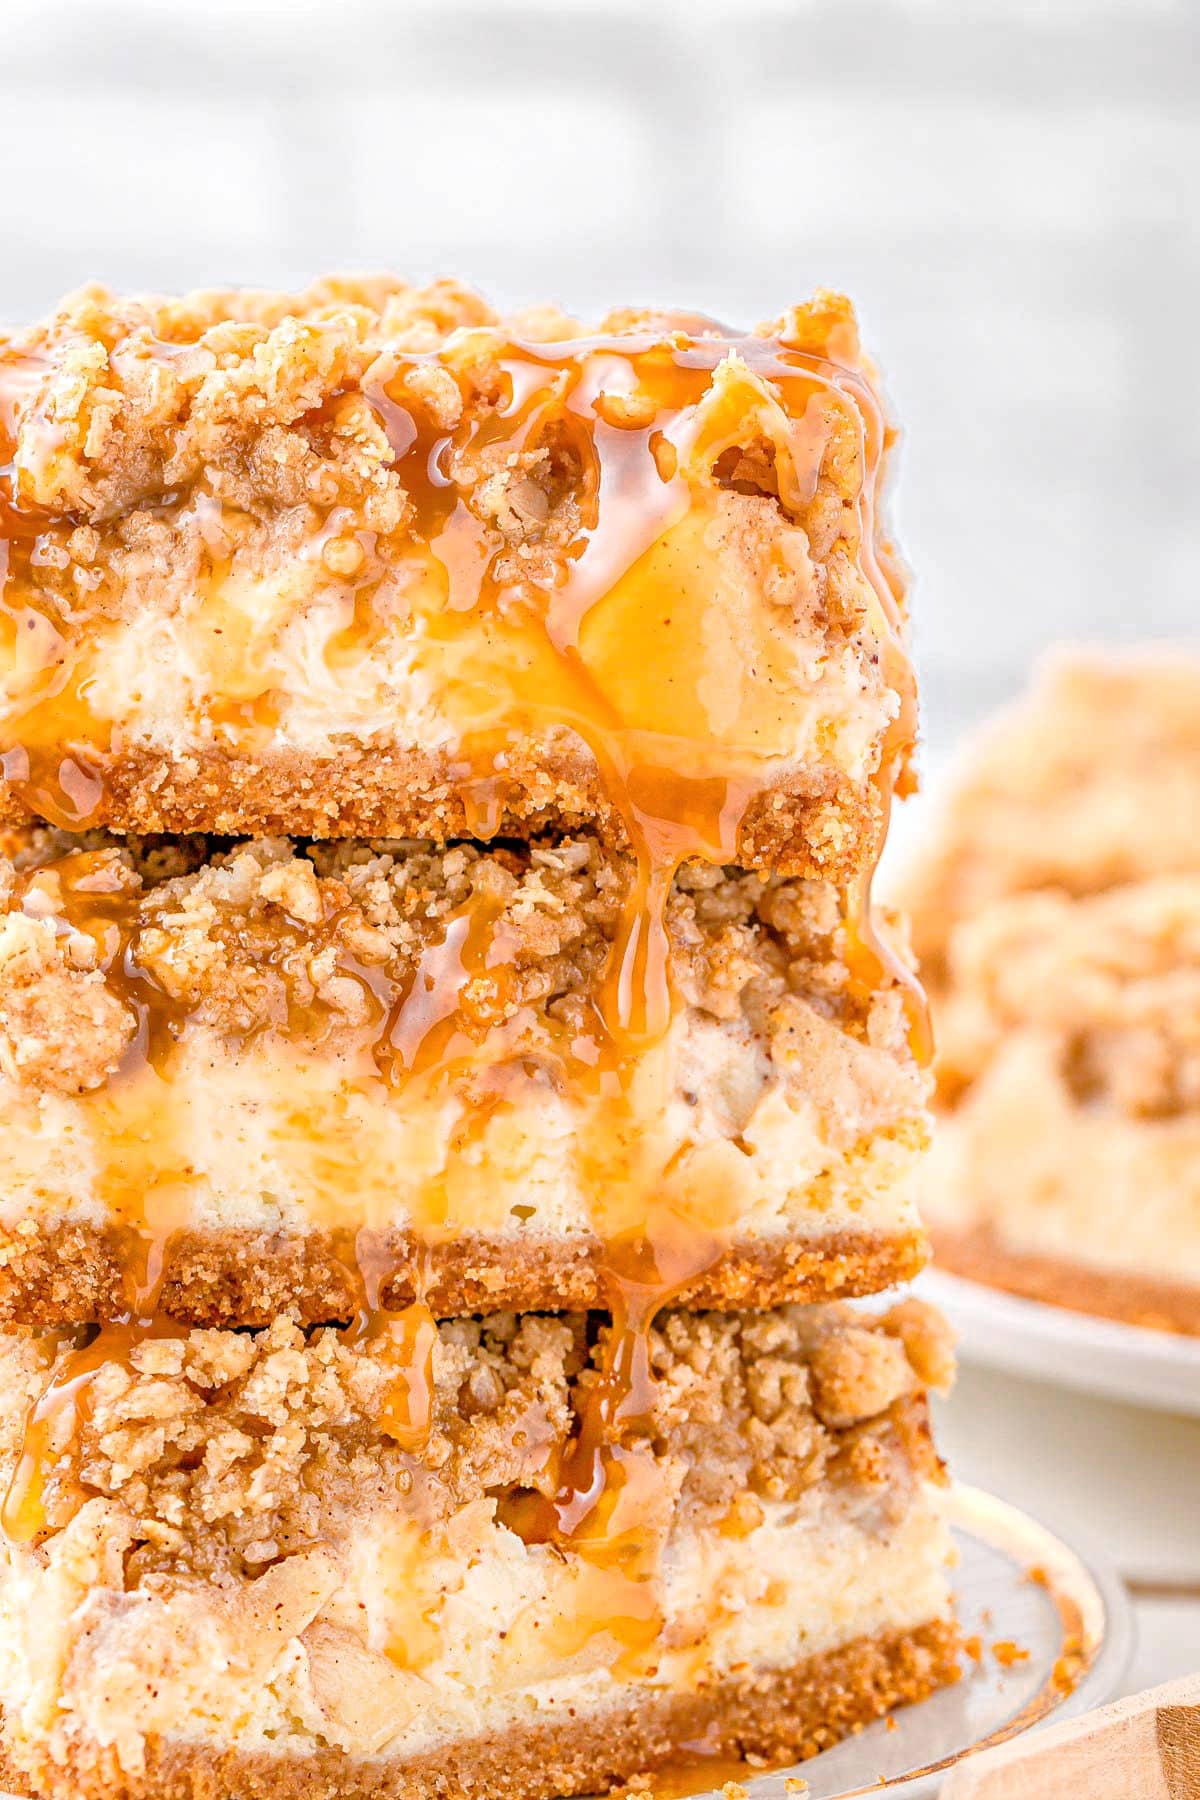 three caramel apple cheesecake bars stacked on a white plate with a gold rim. caramel sauce is drizzled on top of the bars.